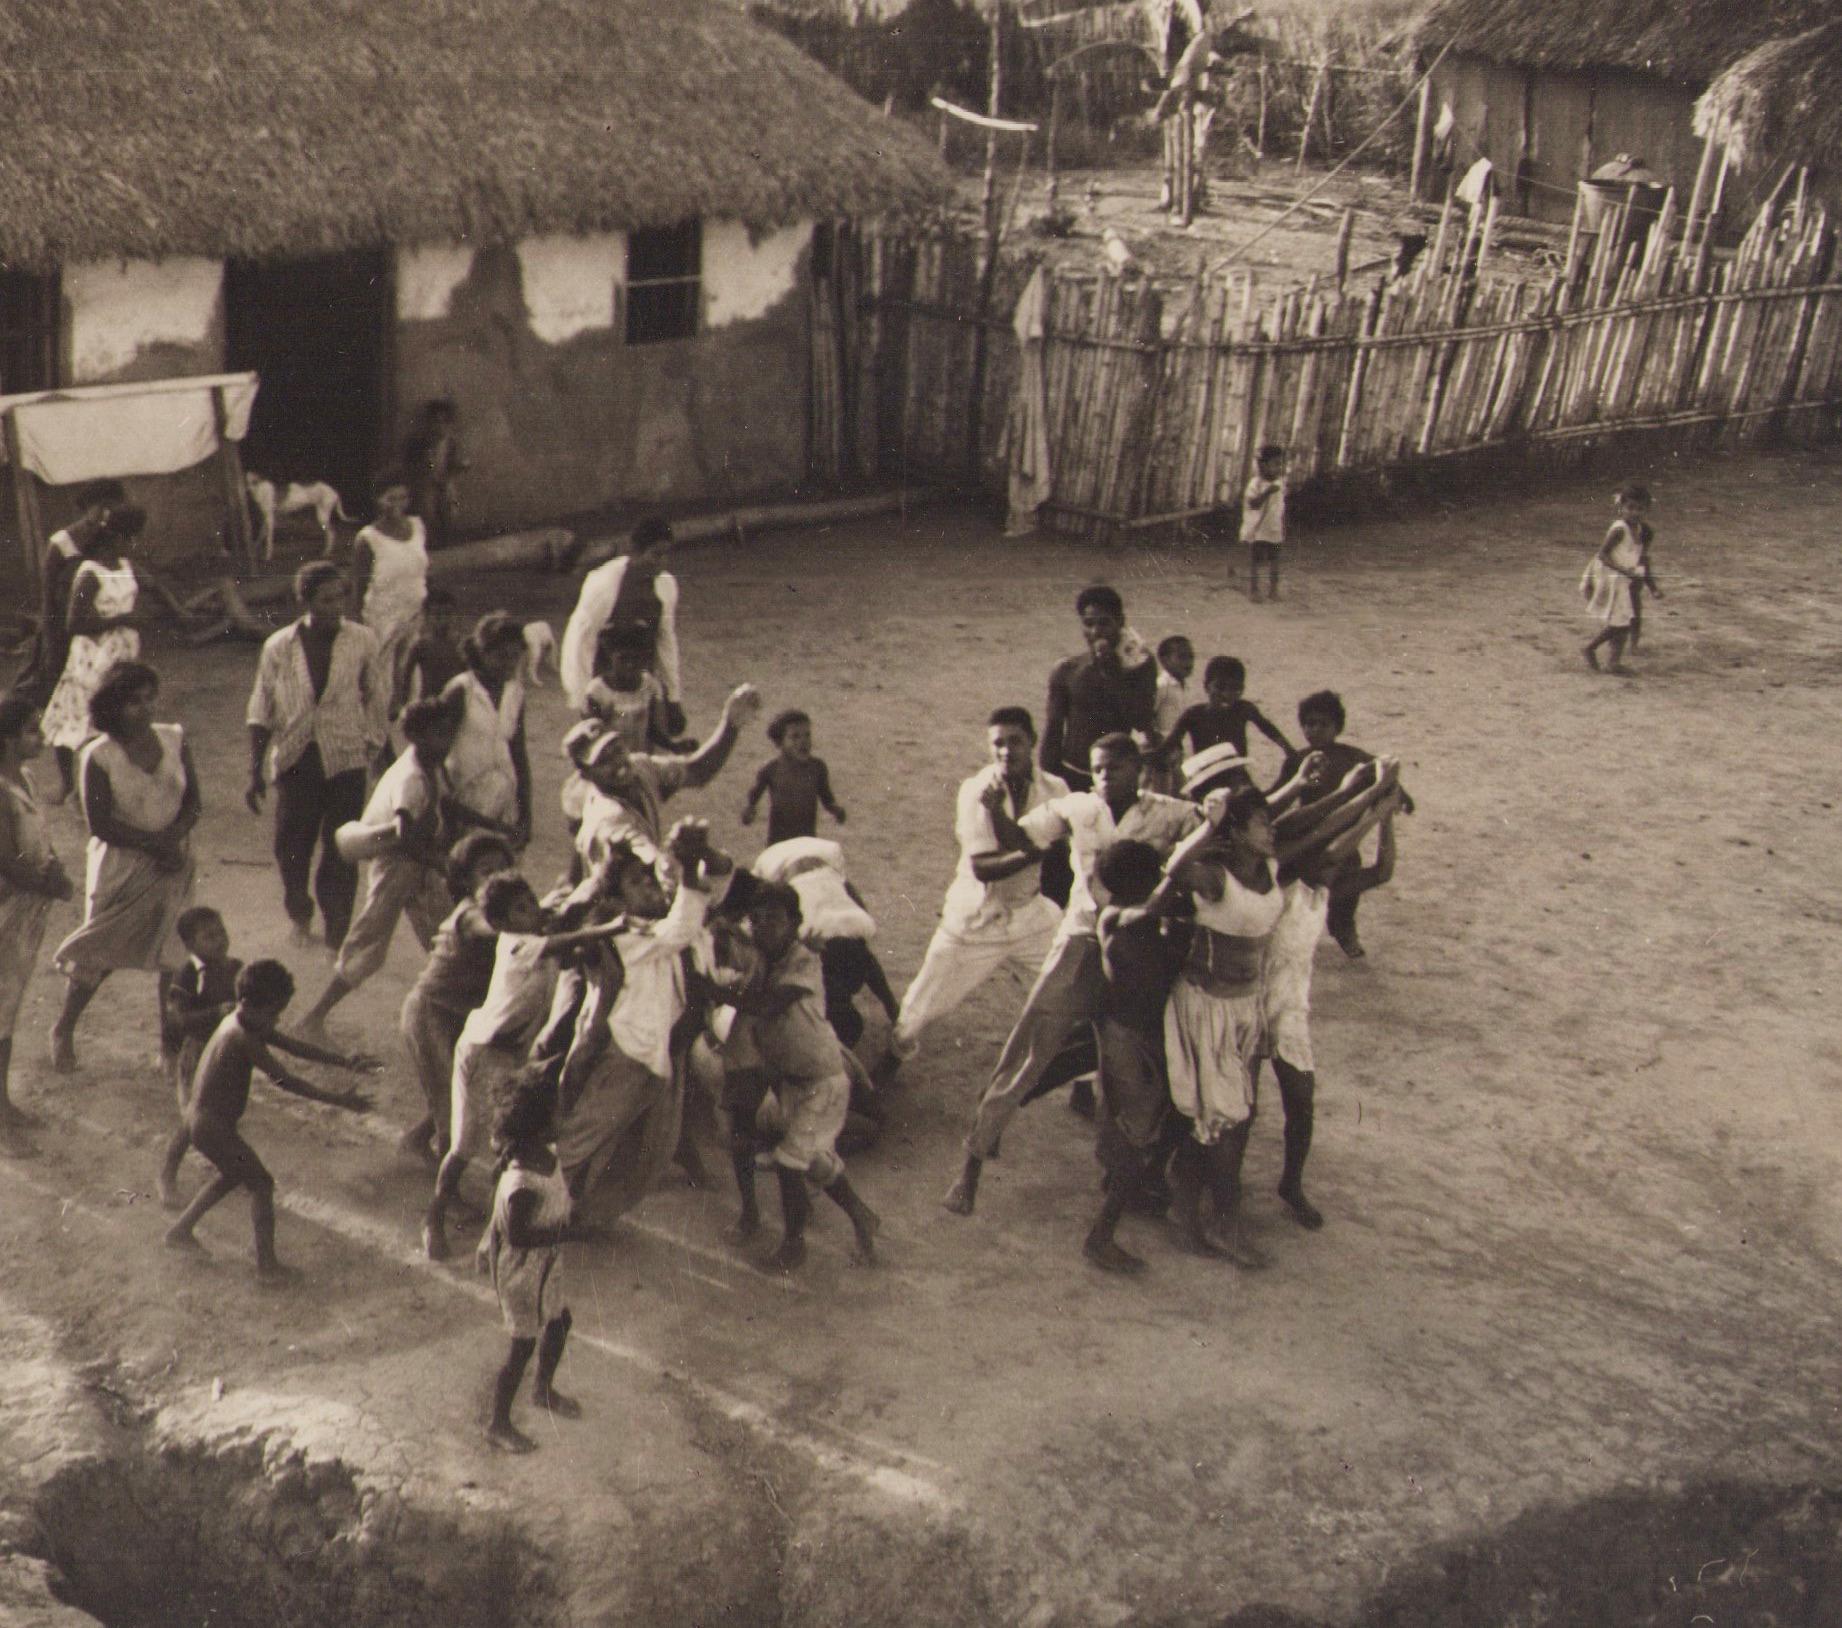 Colombia, Village, People, Black and White Photography, 1960s, 17, 2 x 22, 2 cm For Sale 1